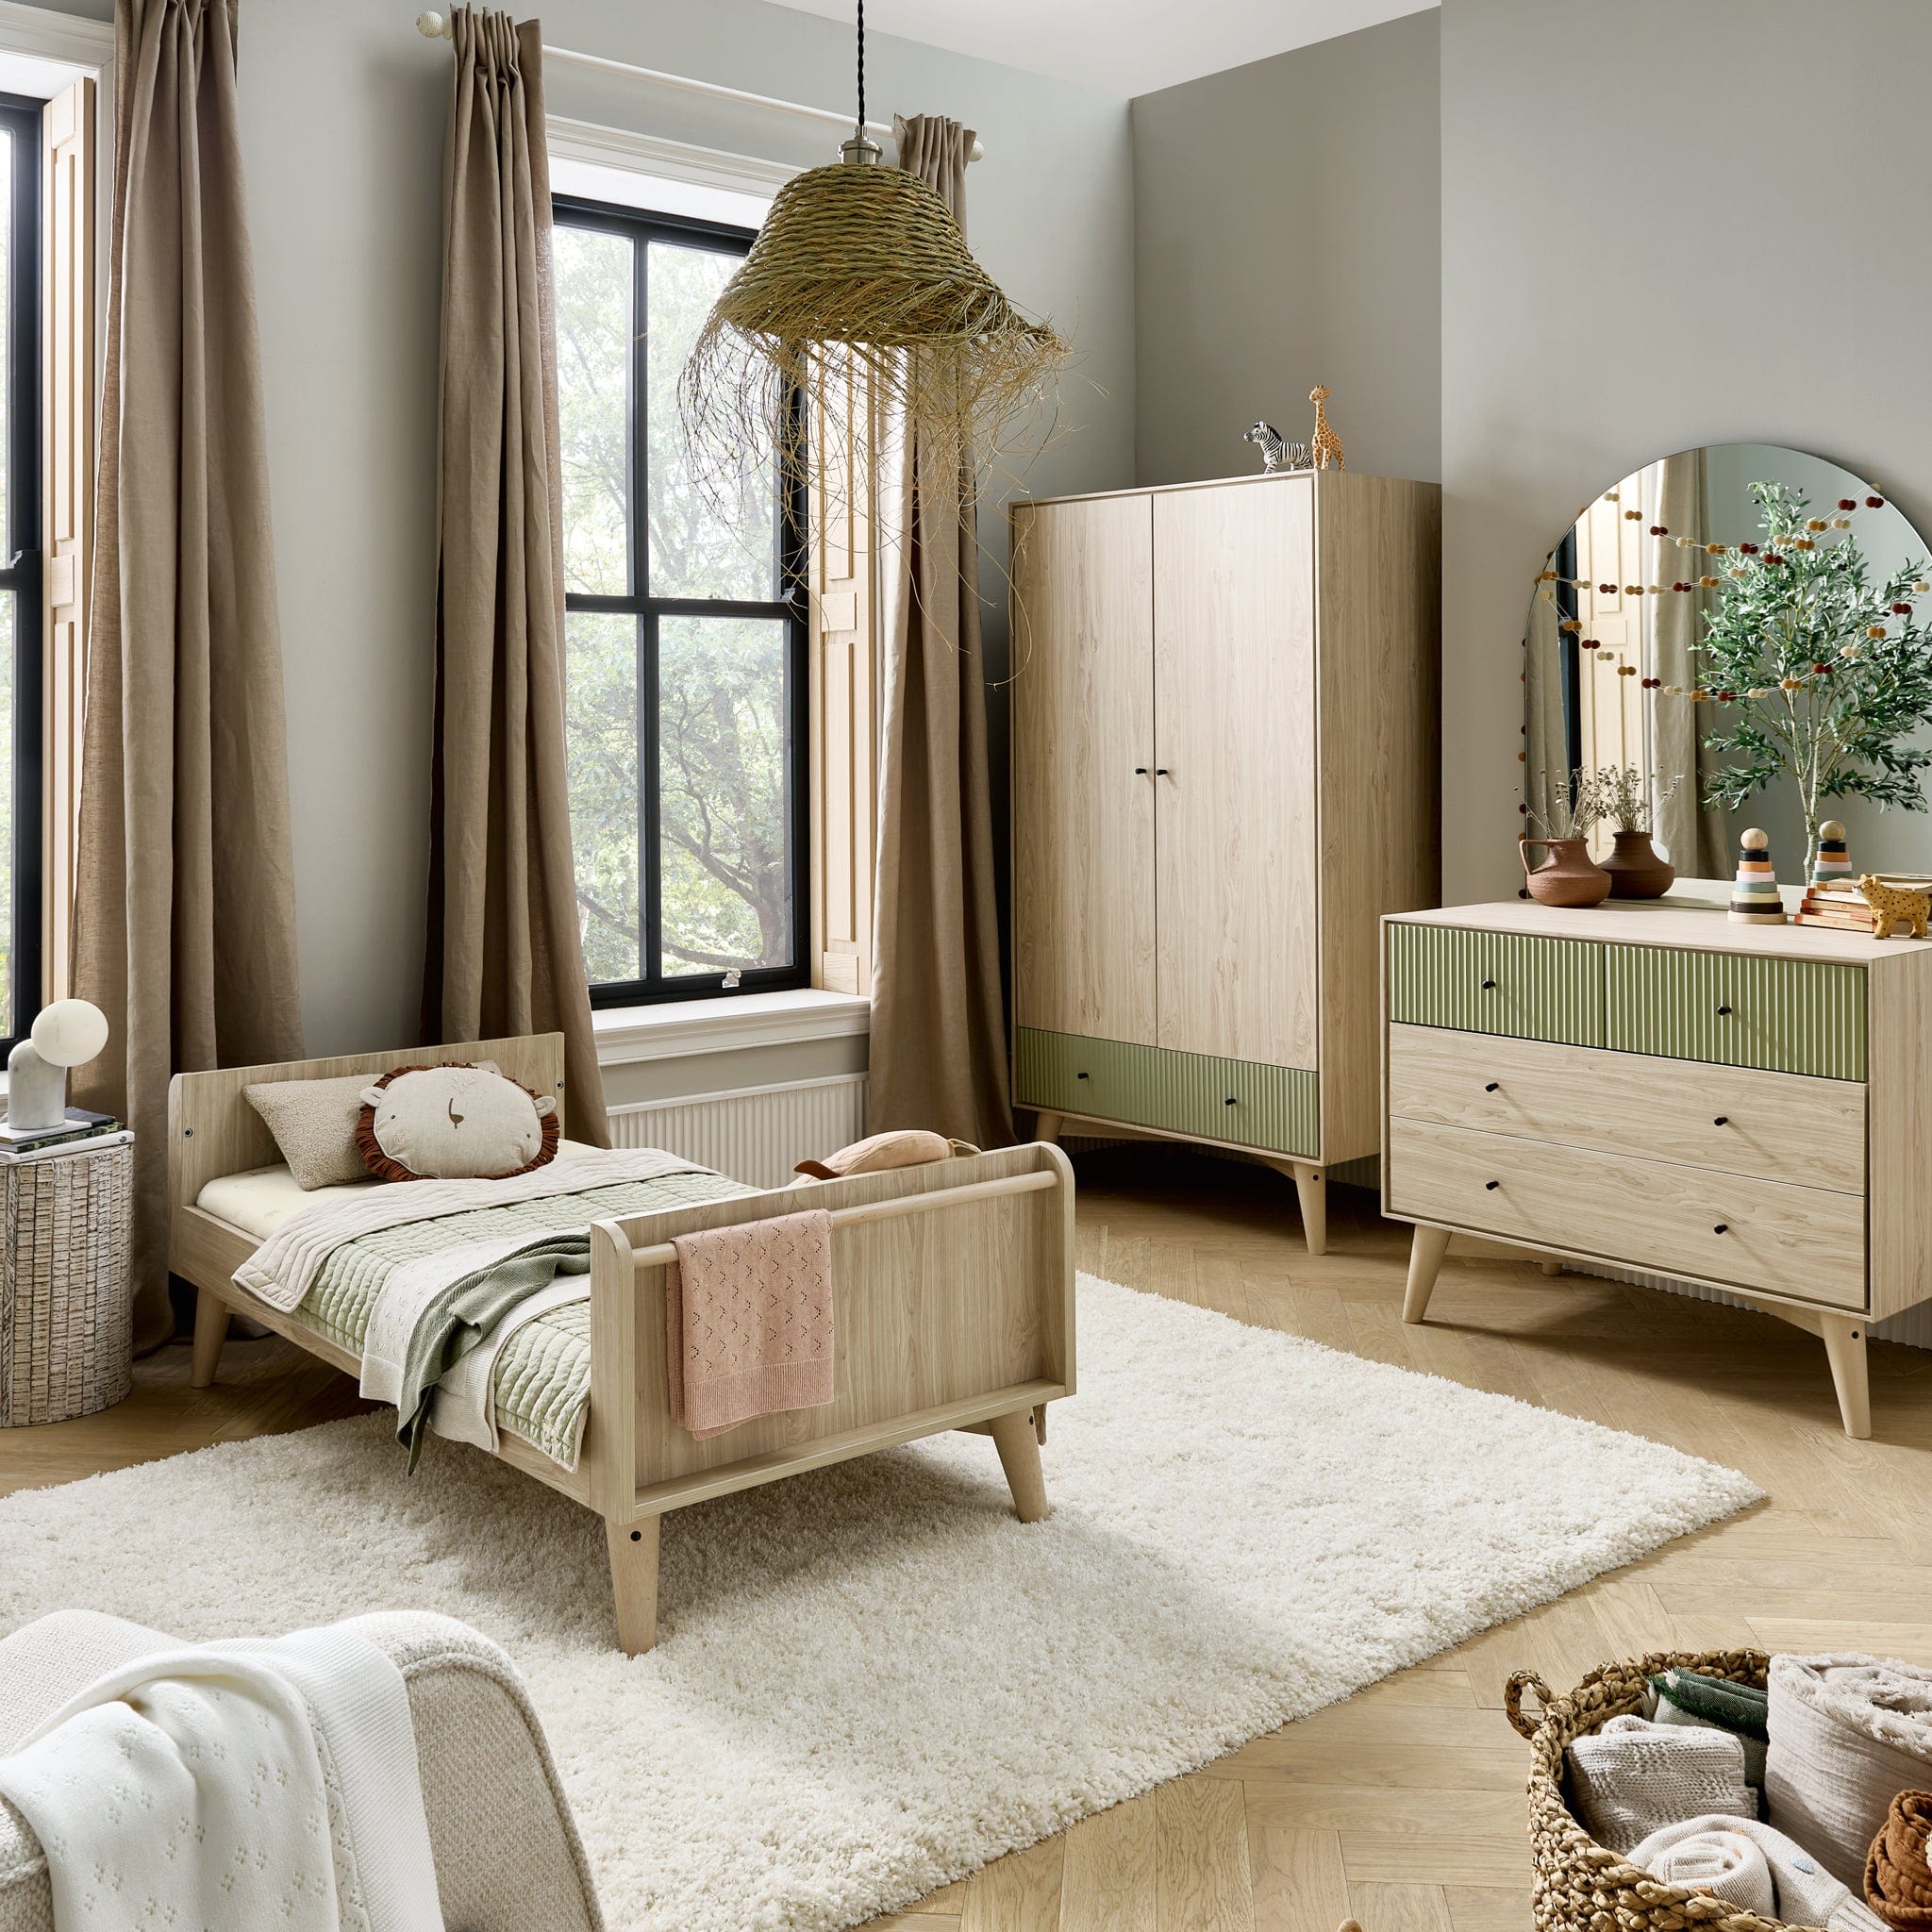 Mamas & Papas Coxley 3 Piece Cotbed Range in Natural/Olive Nursery Room Sets